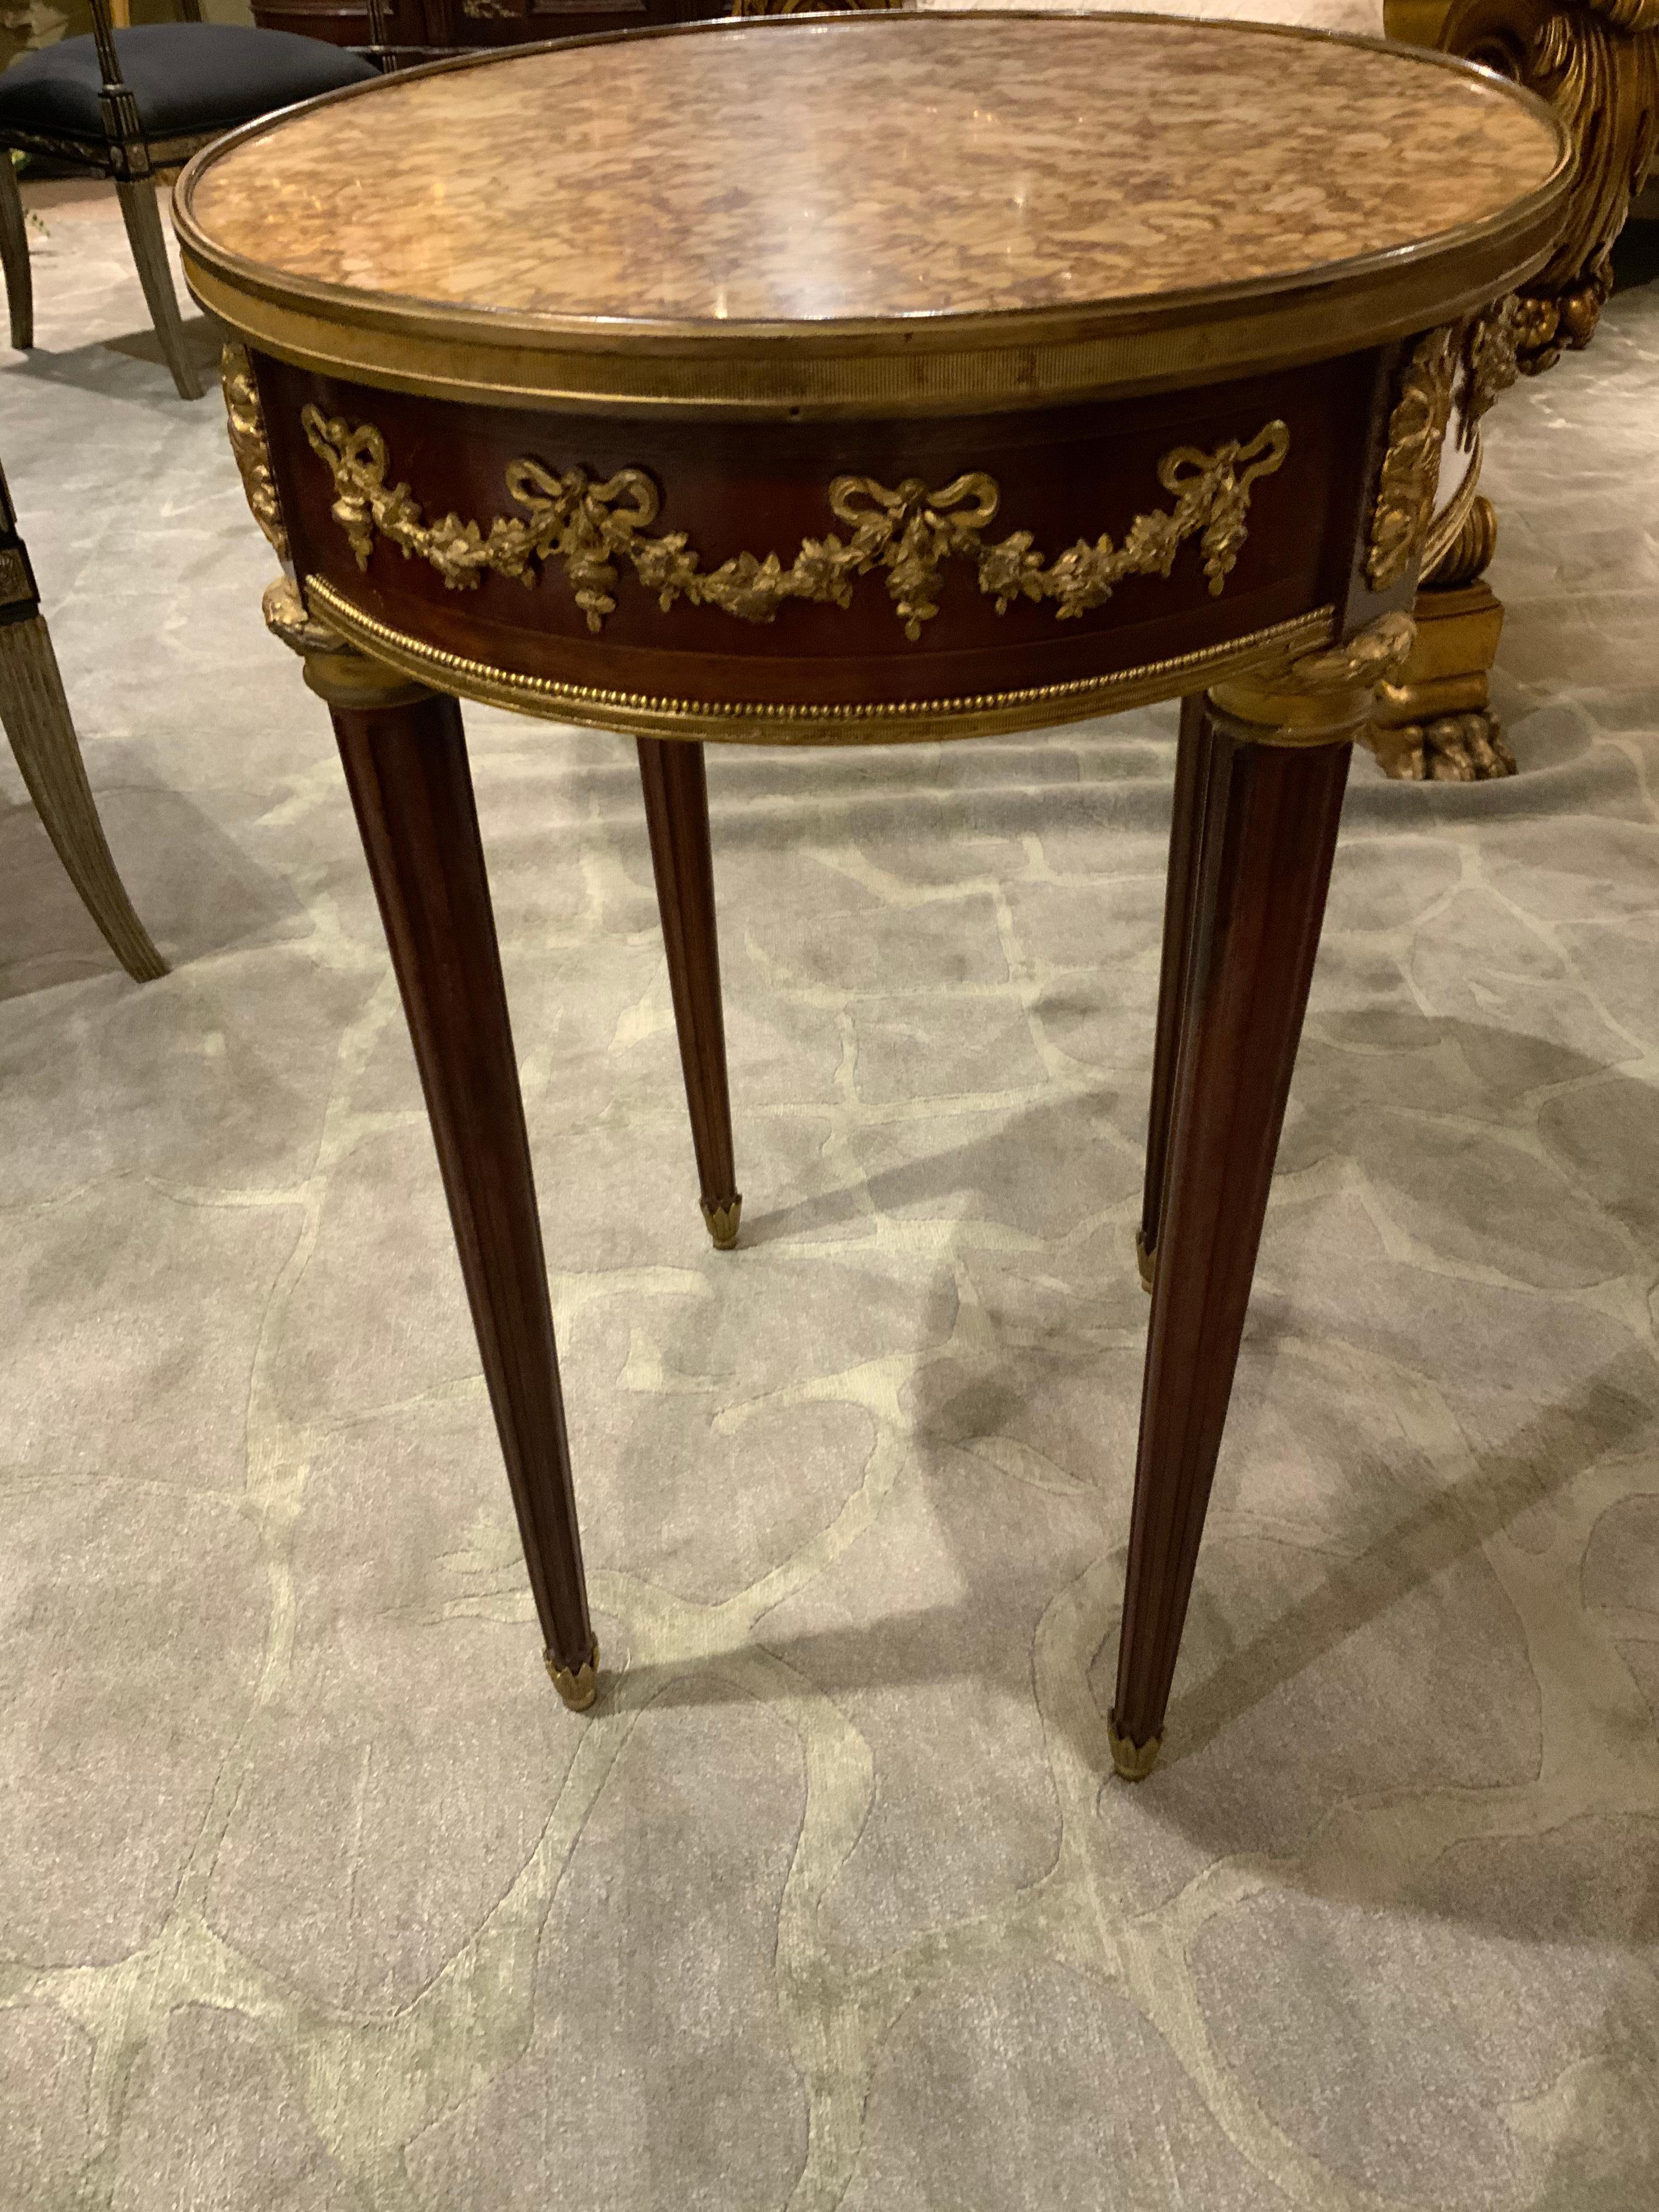 19th Century French Oval Side Table with Gilt Bronze Mounts and Marble Top, Louis XVI Style For Sale